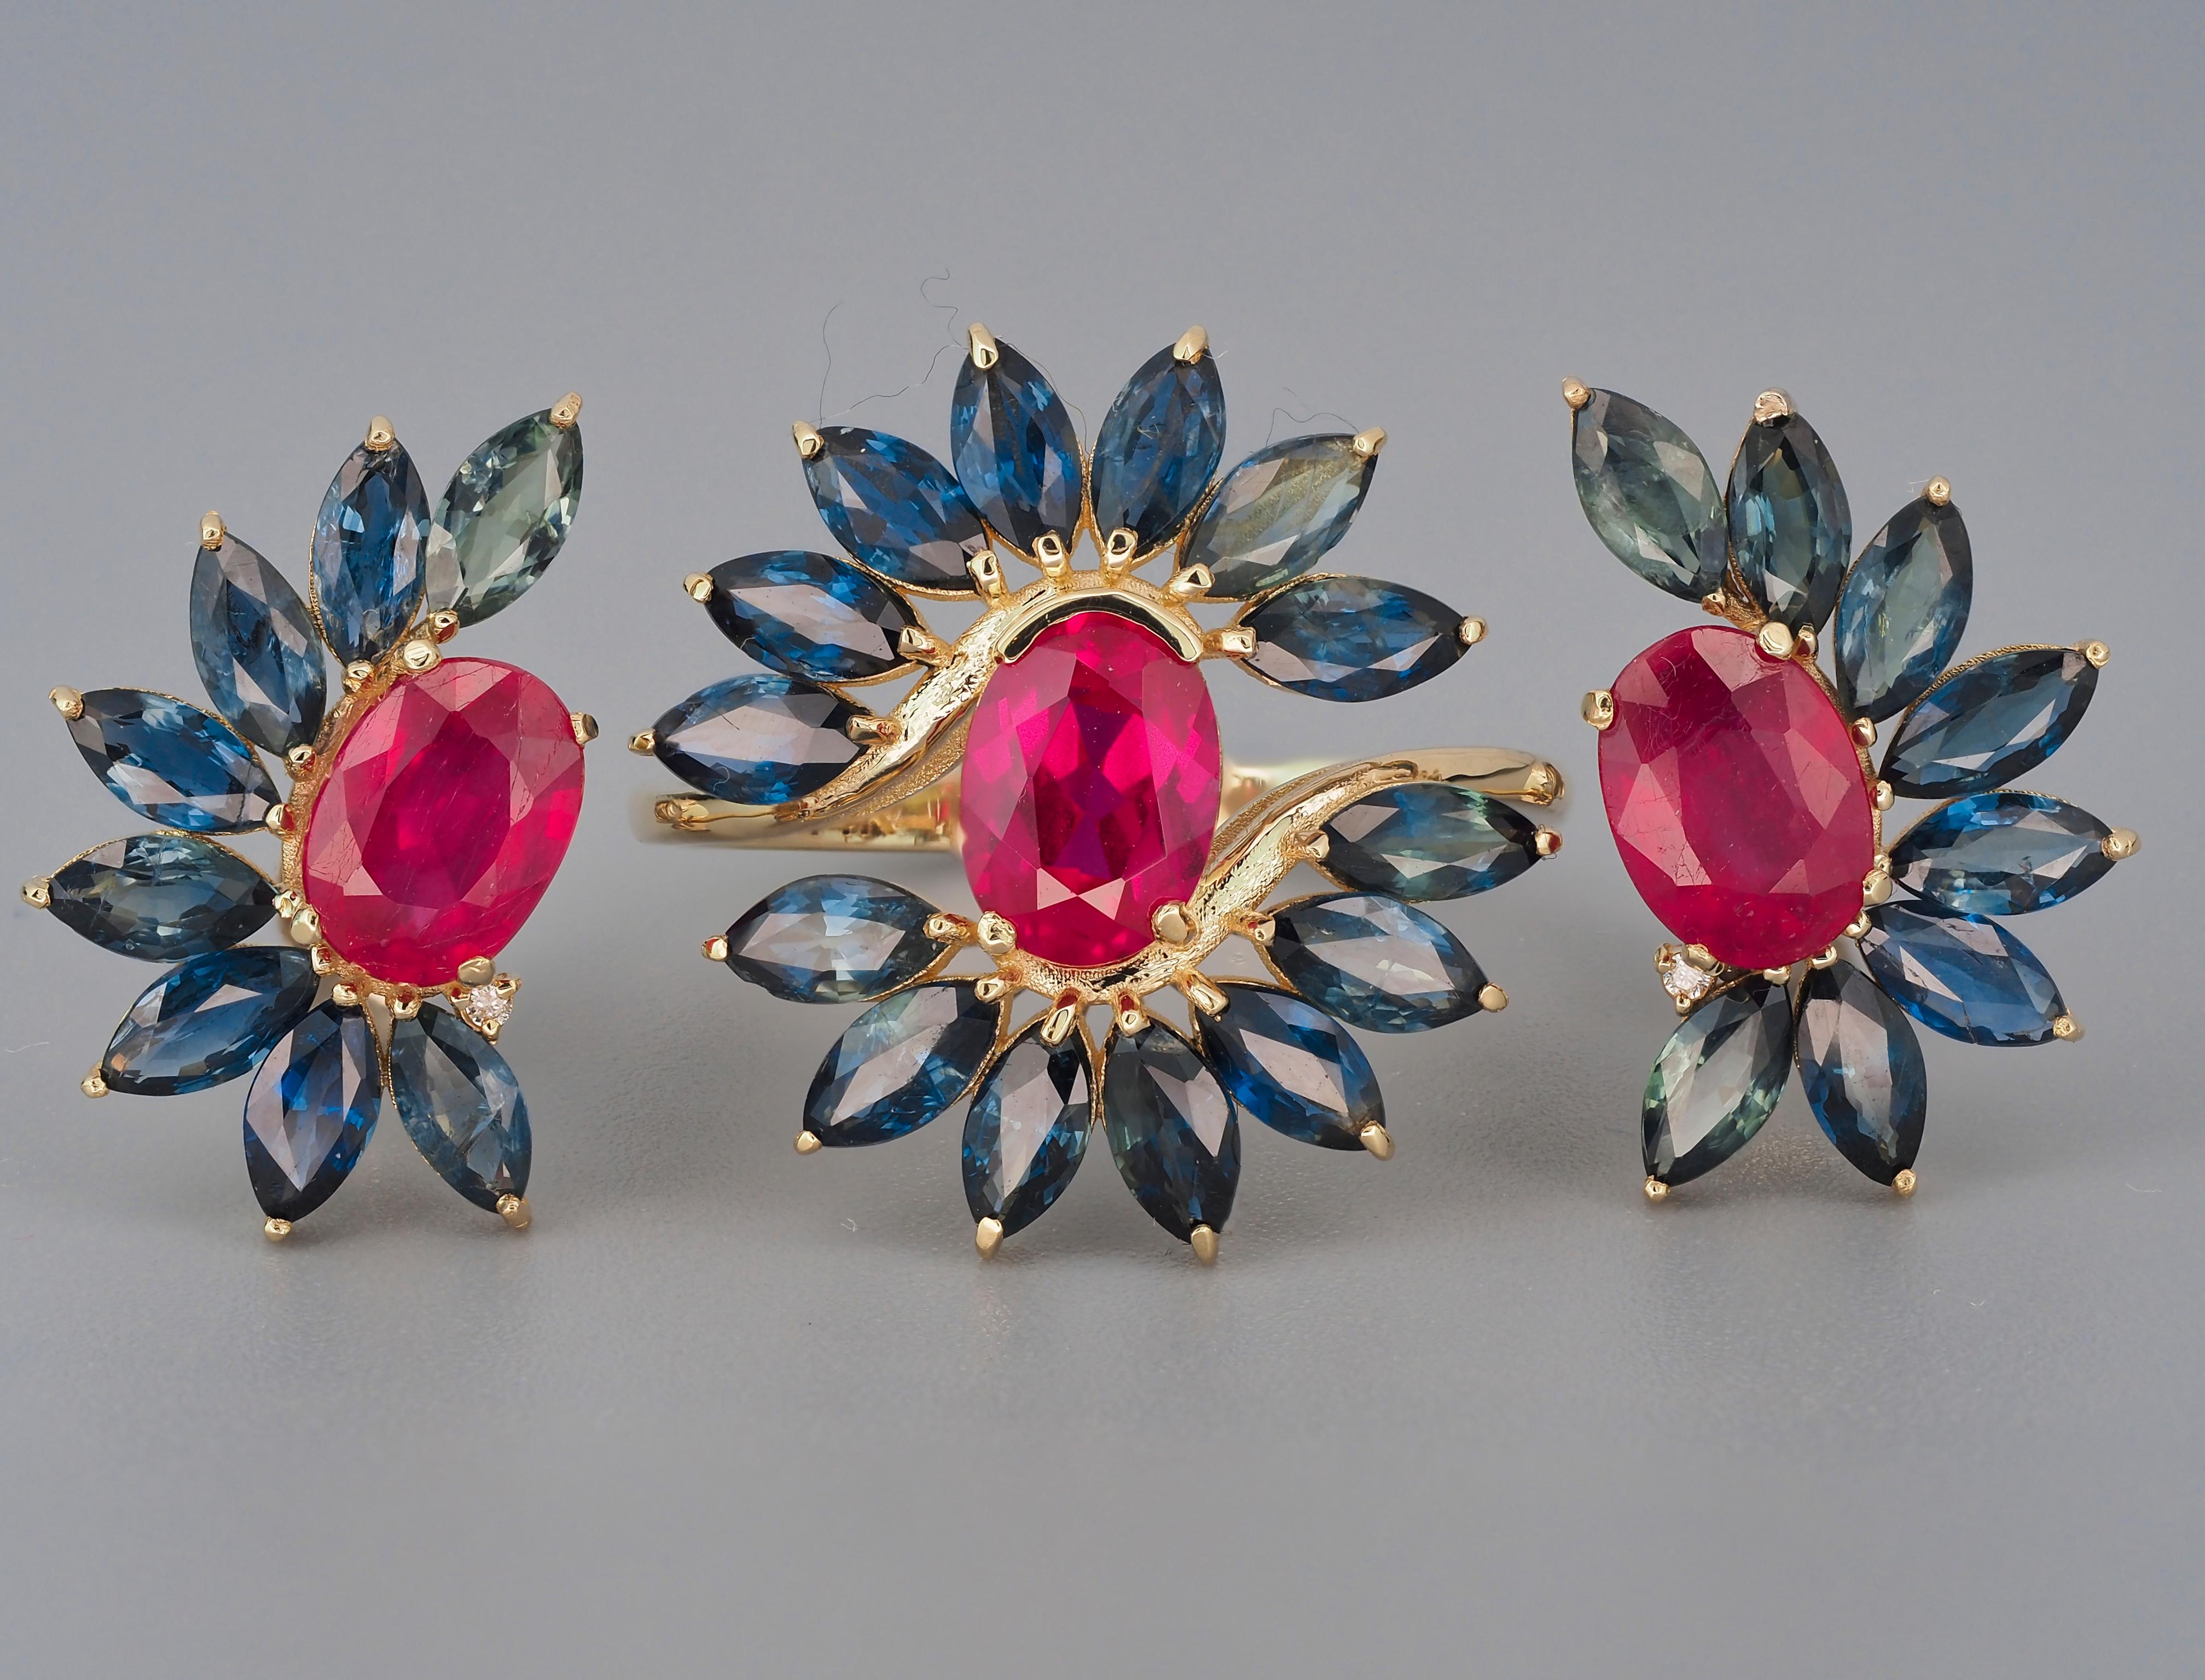 Jewelry set: earrings and ring with rubies and sapphires in 14k gold. 
Ruby ring, earrings. Sapphire ring, earrings. Ruby, sapphire jewelry.

Total weight: 4.8 g. depends from size.
Material: 14 k gold. 
Size Earrings: 11x16.6mm
Size rings face: